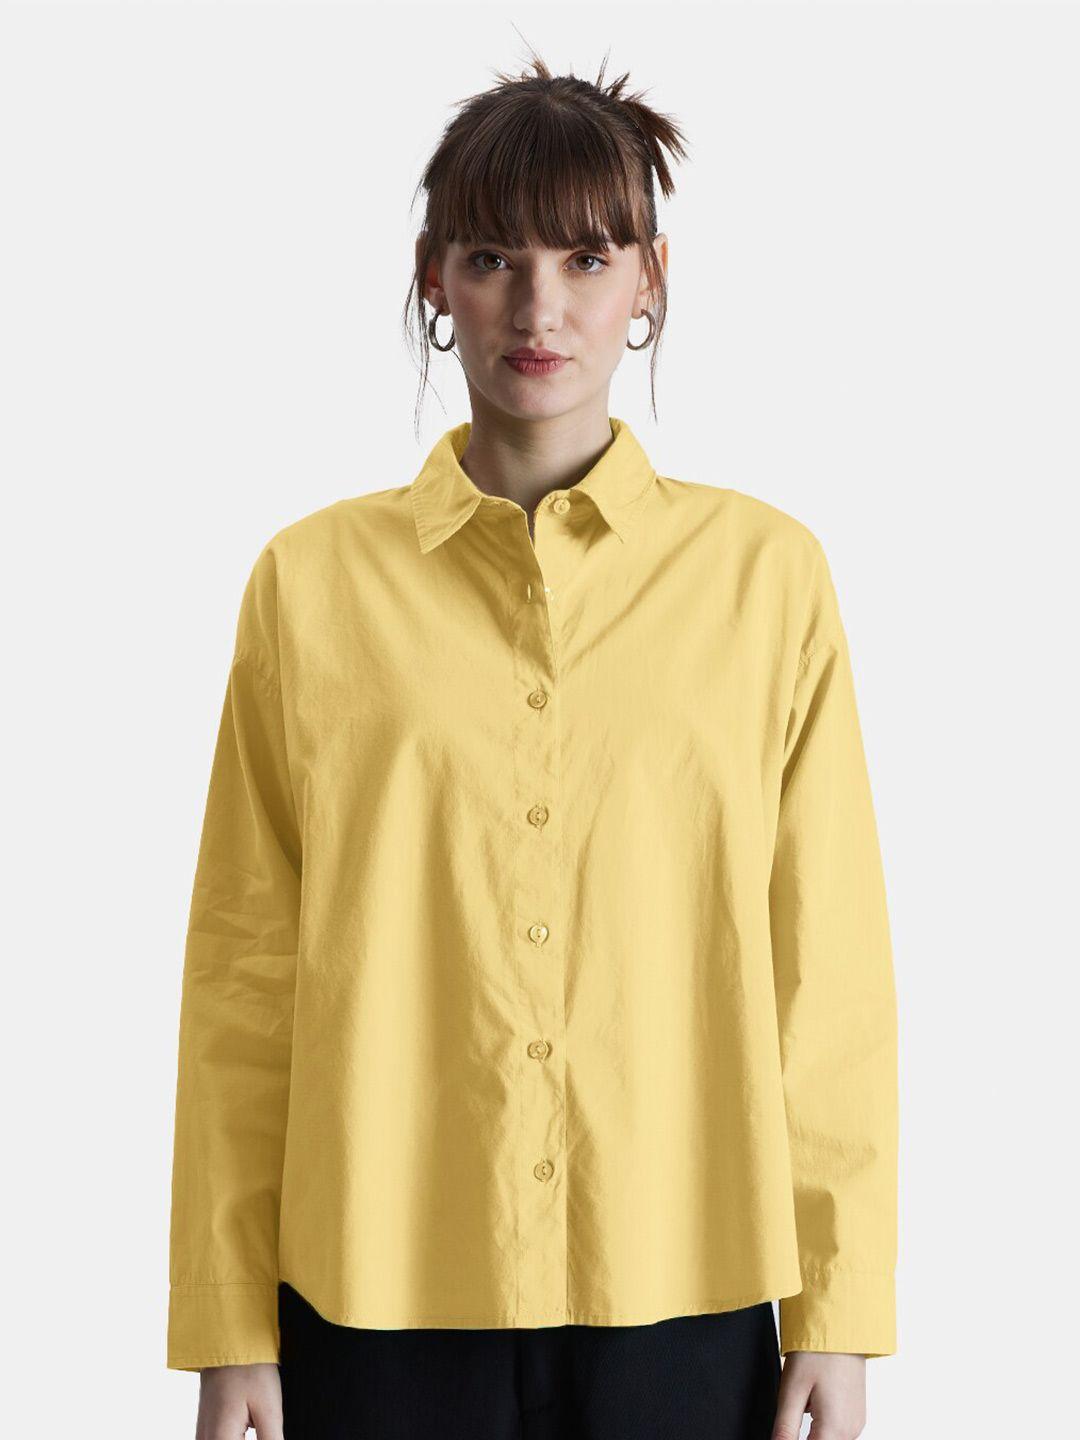 the souled store relaxed boxy cotton casual shirt